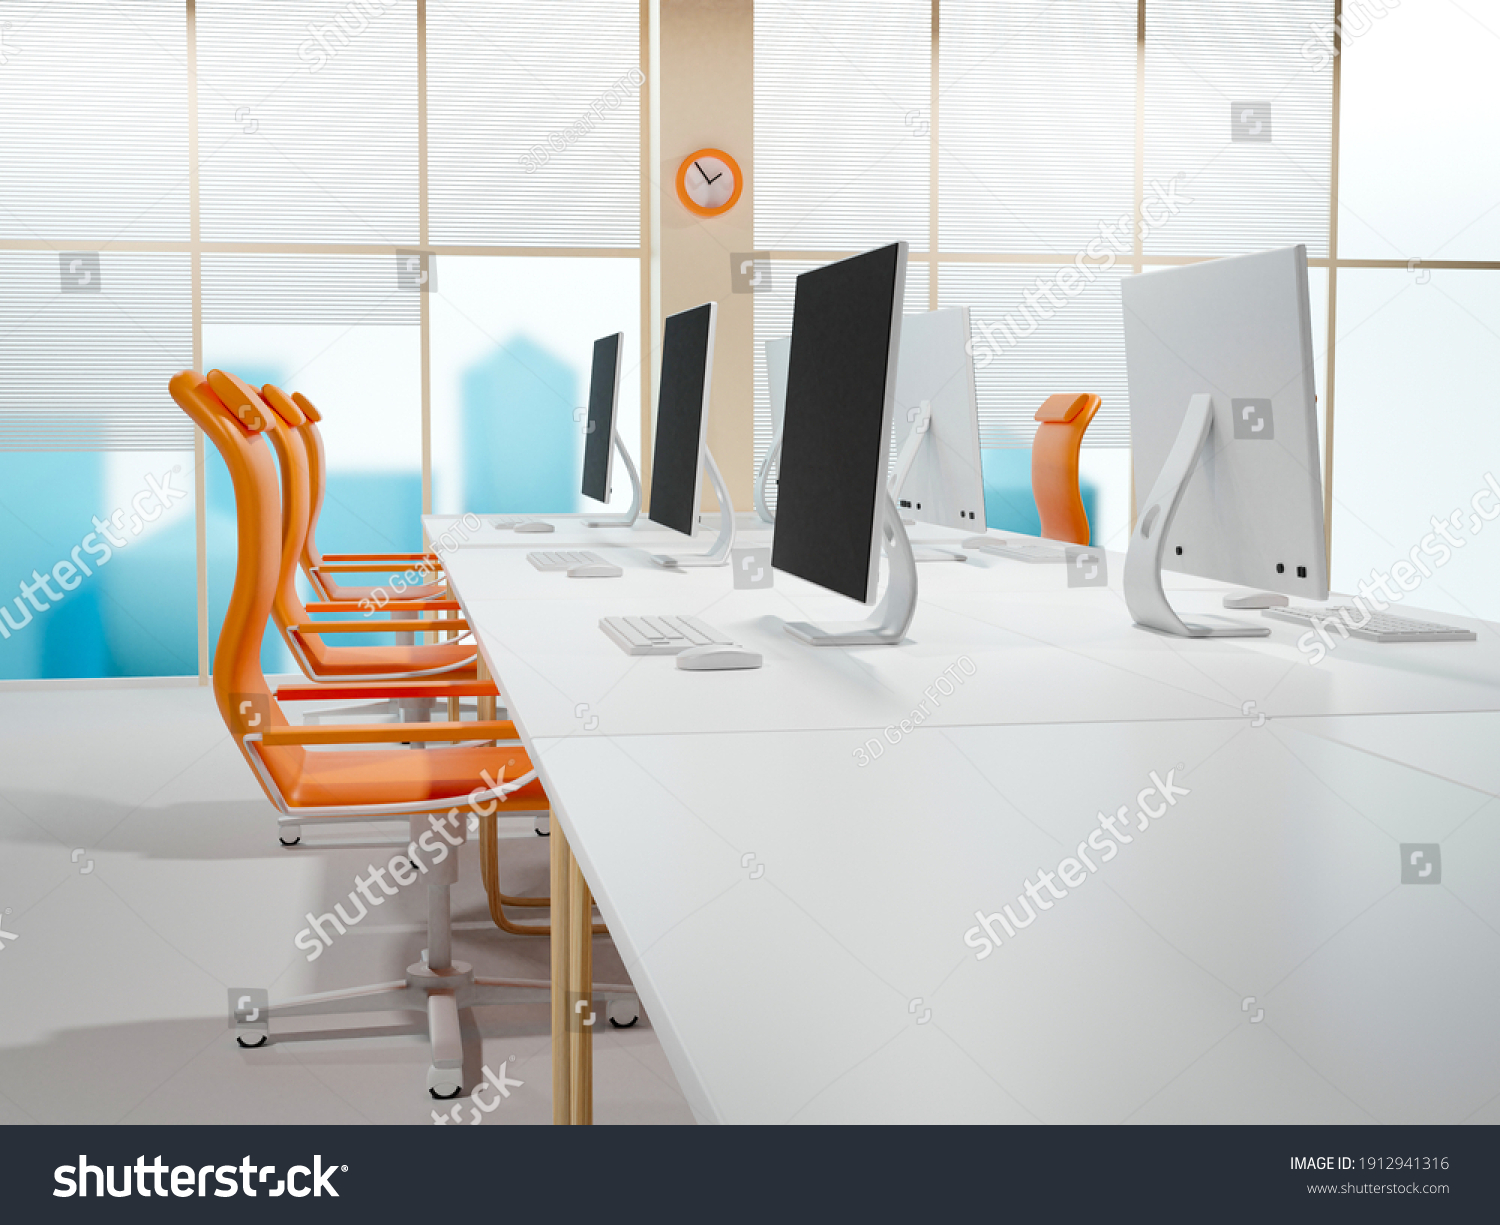 Stock Photo  D Image Cartoon Contemporary Office Interior With City View Daylight Furniture And Equipment 1912941316 